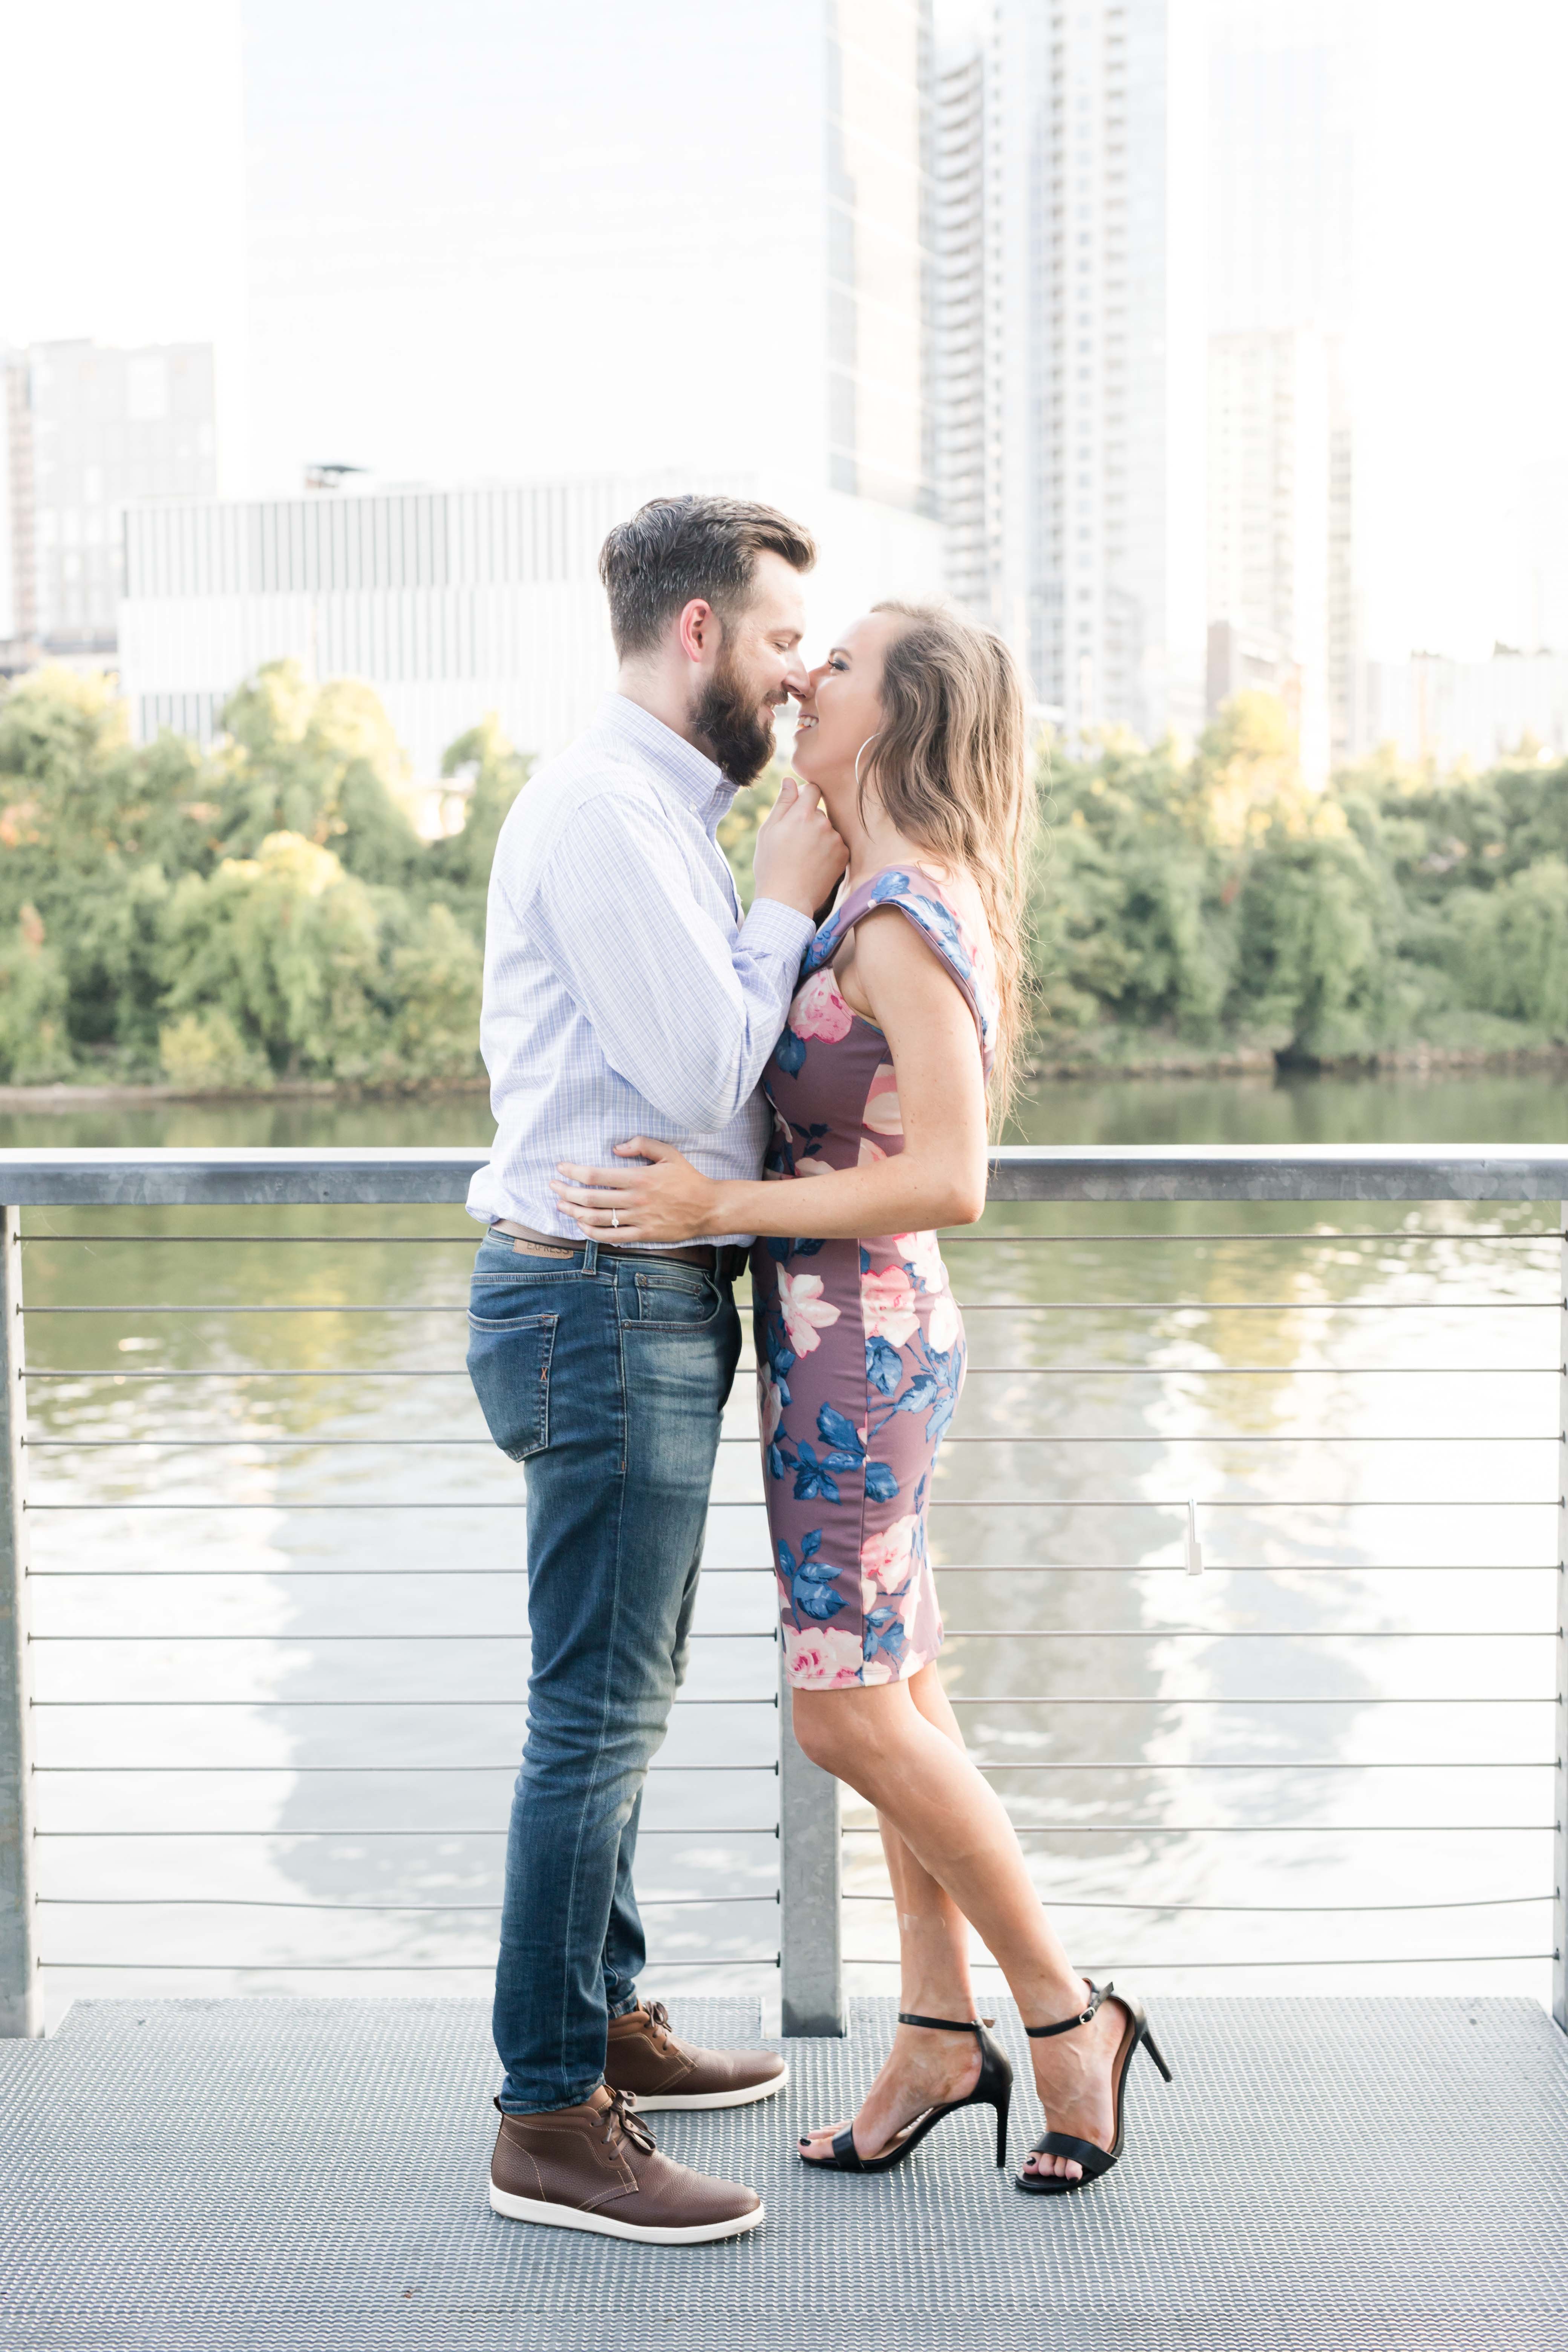 guy in button down brings girl in purple floral dress in for kiss by river